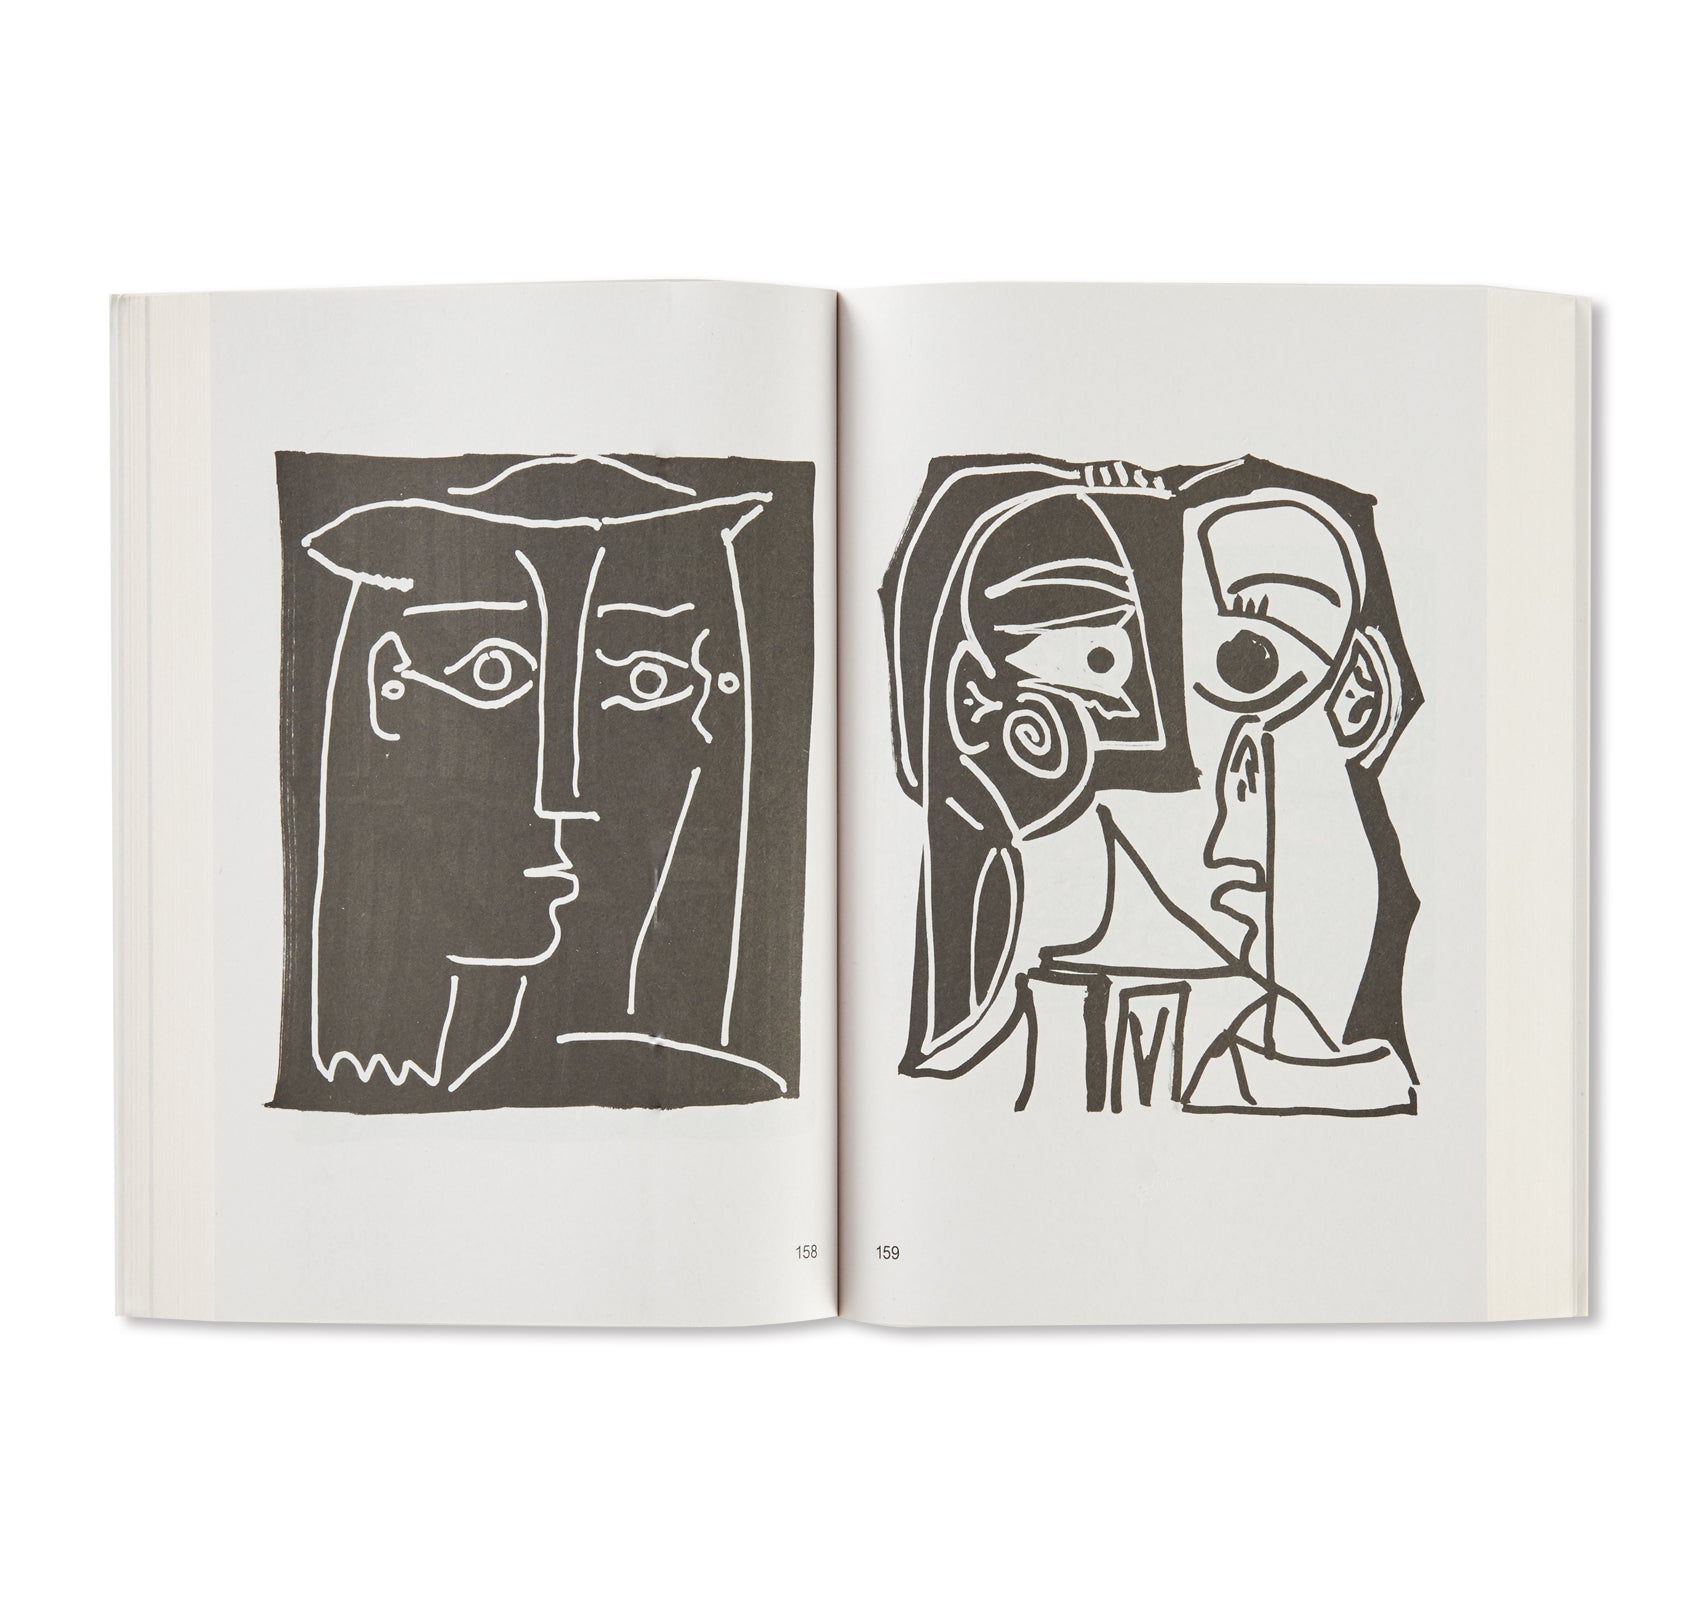 PICASSO AND I by Ryan Gander